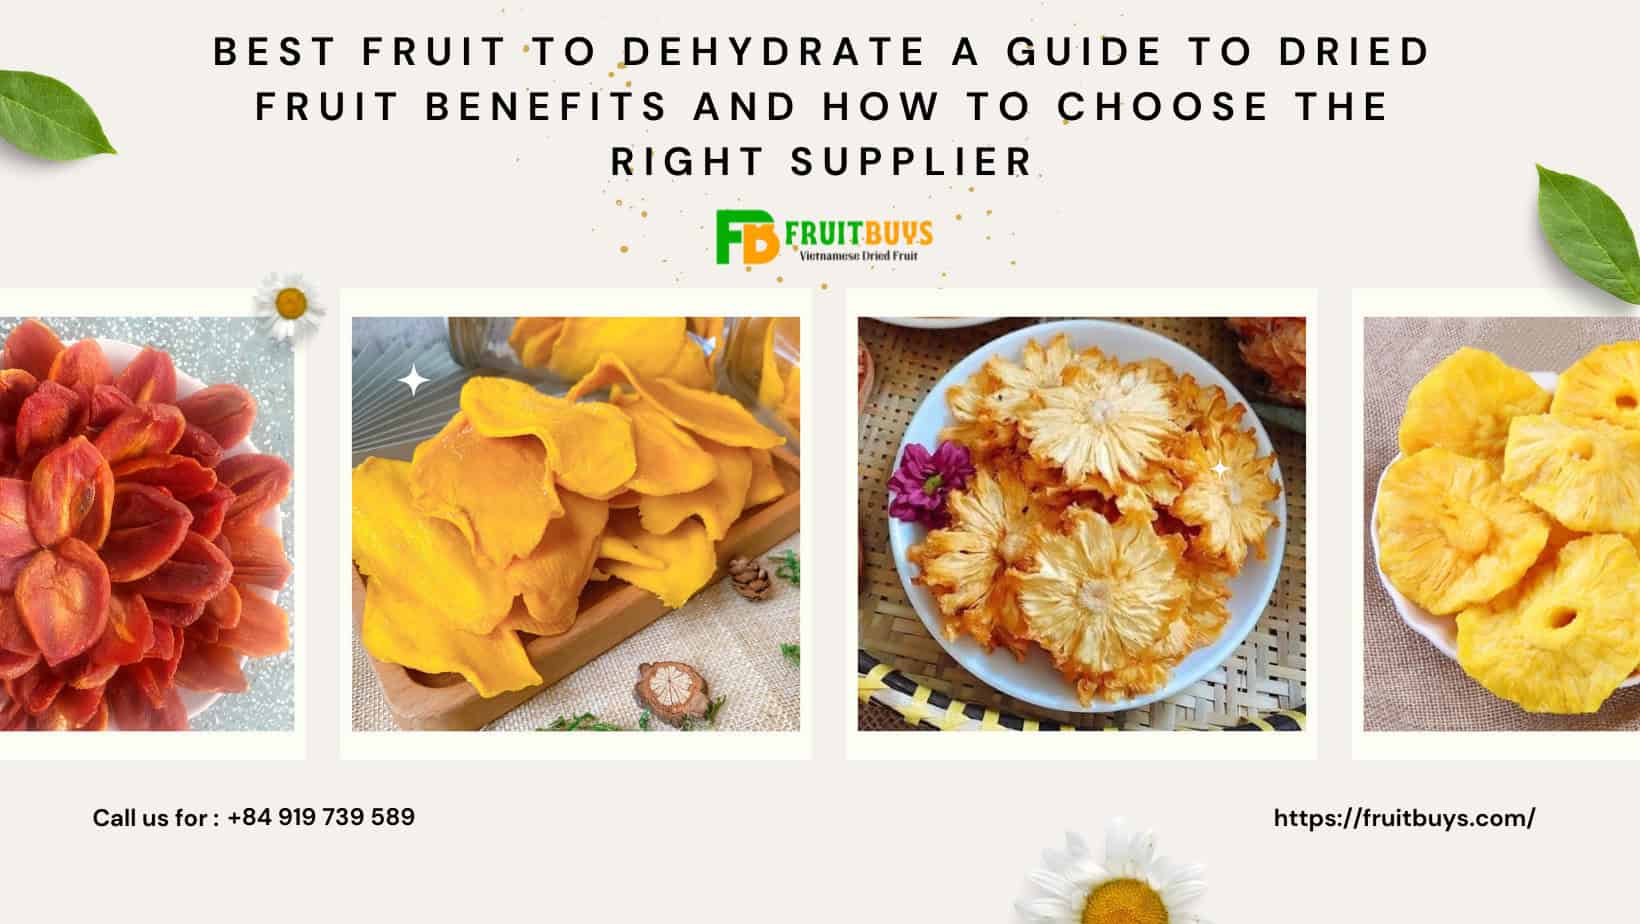 FruitBuys Vietnam  Best Fruit To Dehydrate A Guide To Dried Fruit Benefits And How To Choose The Right Supplier